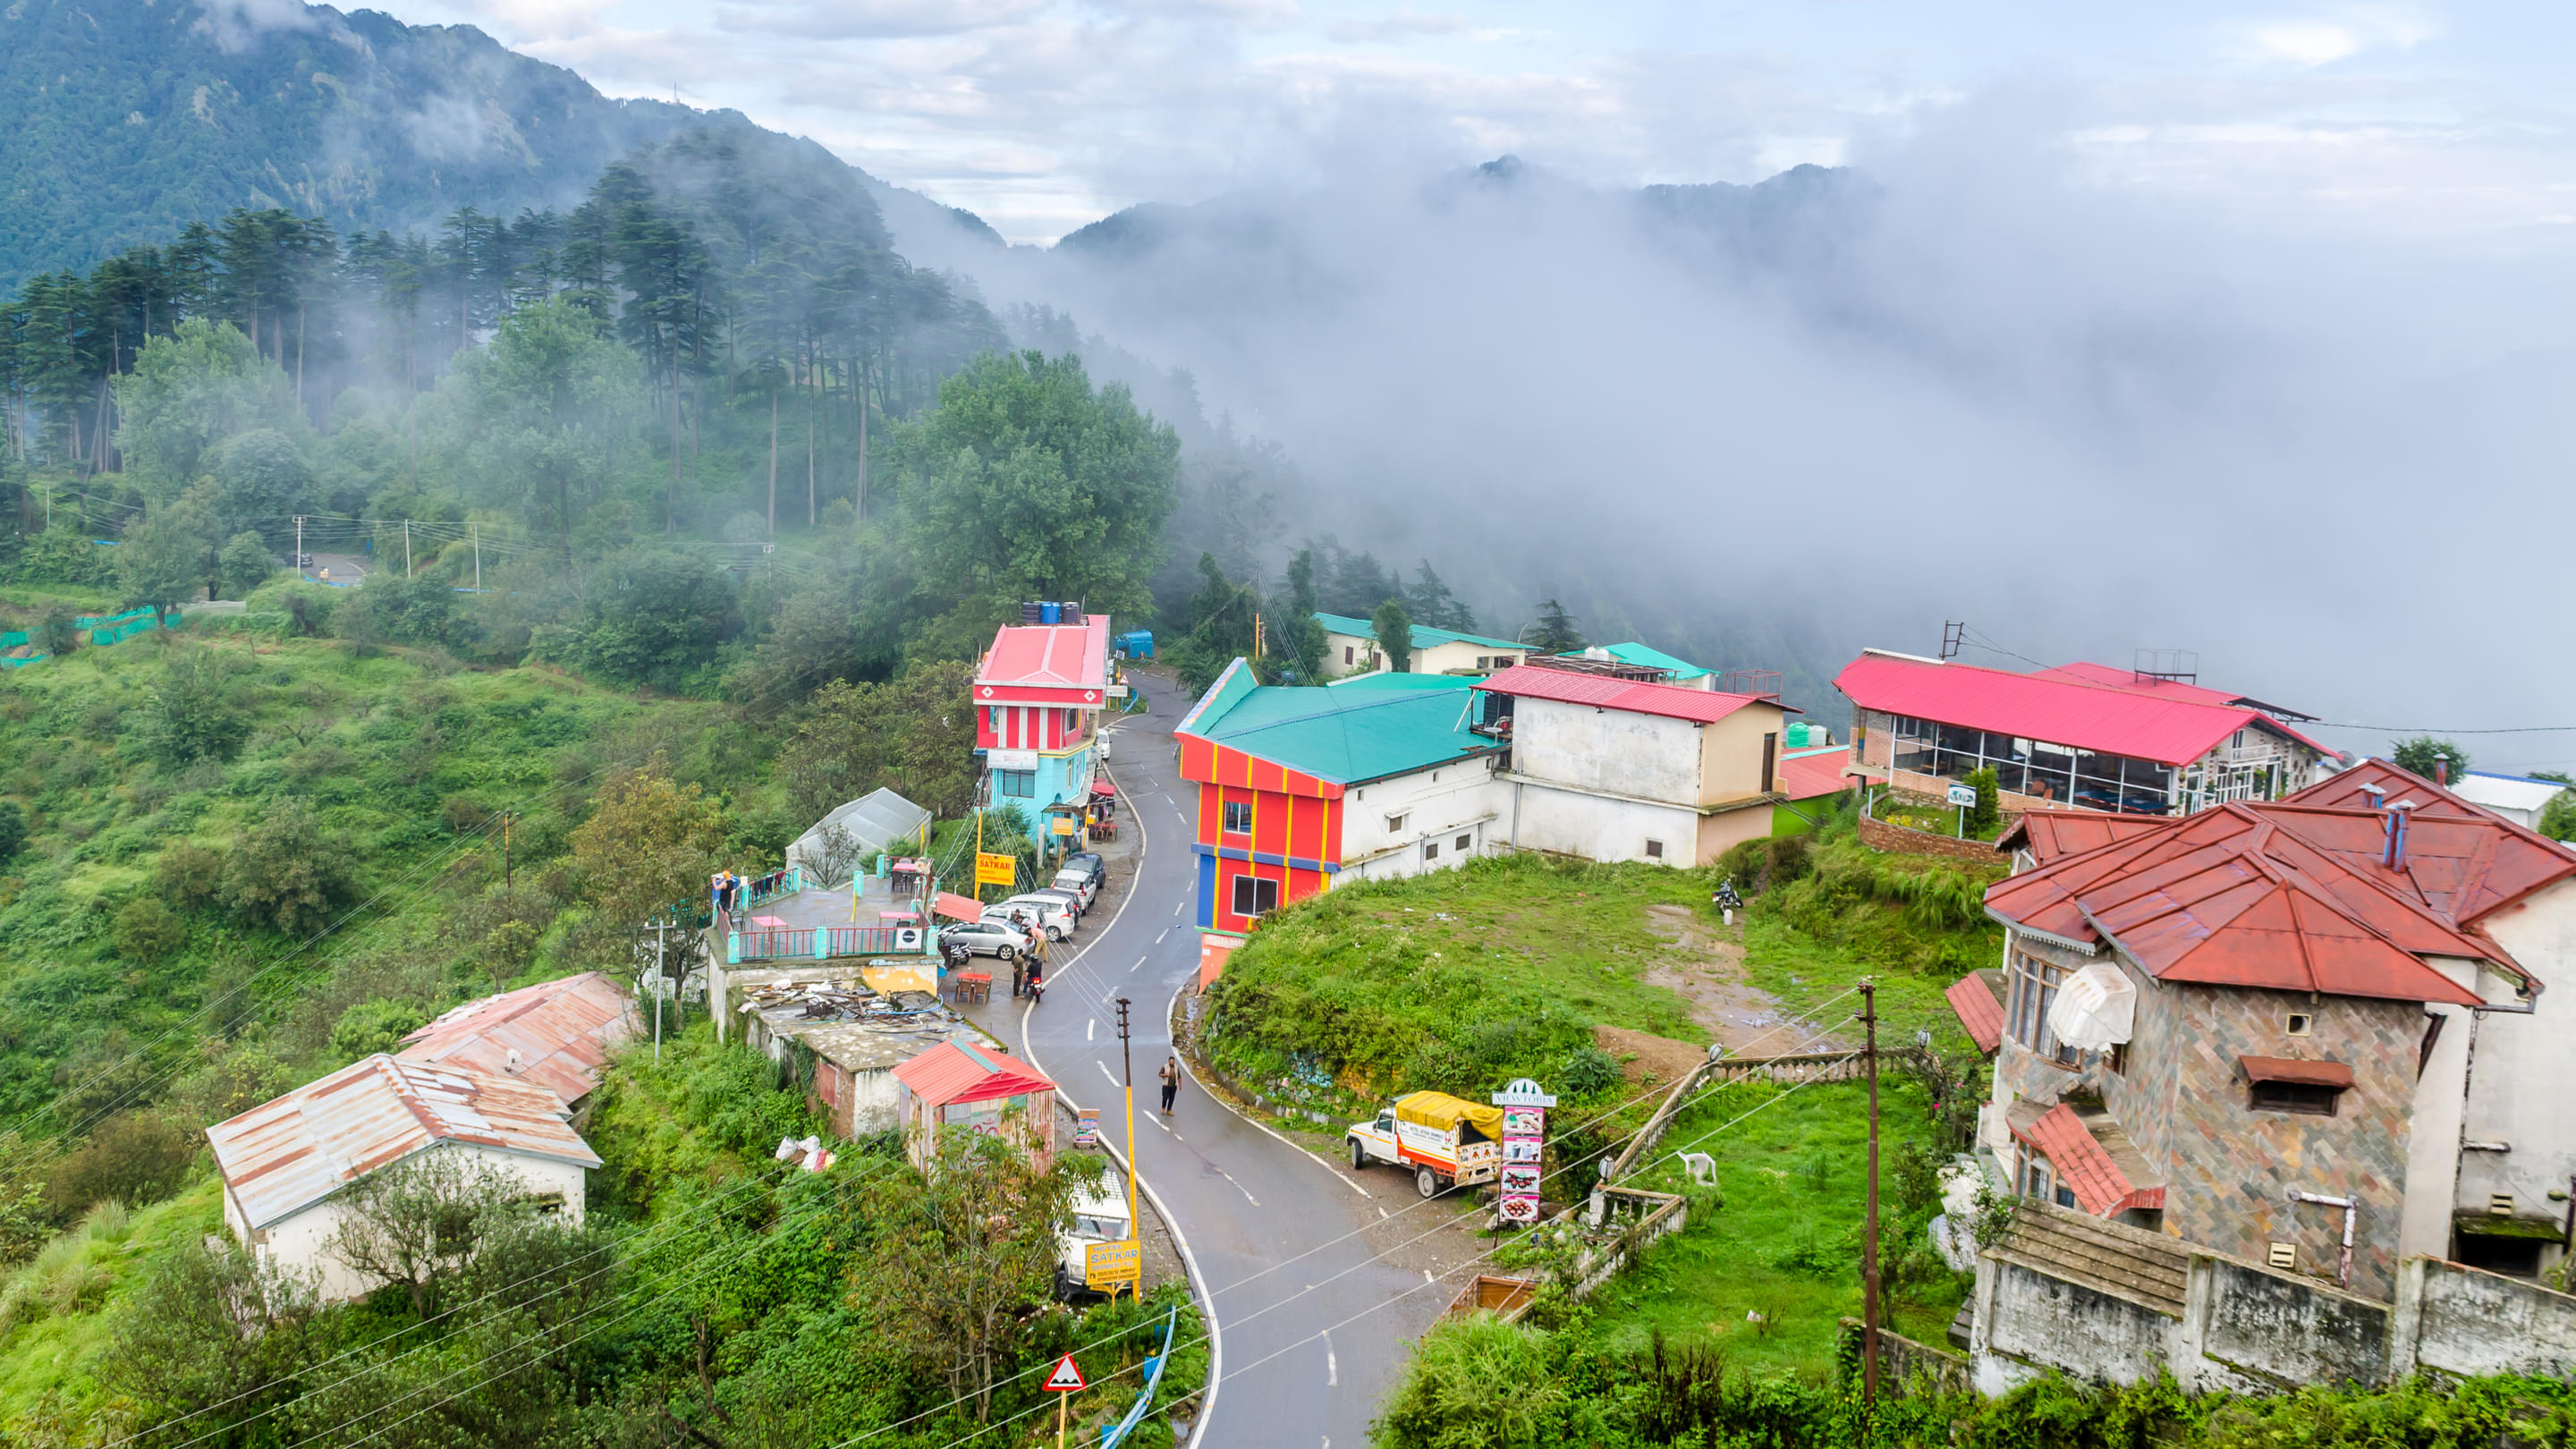 Dhanaulti Packages from Chennai | Get Upto 40% Off